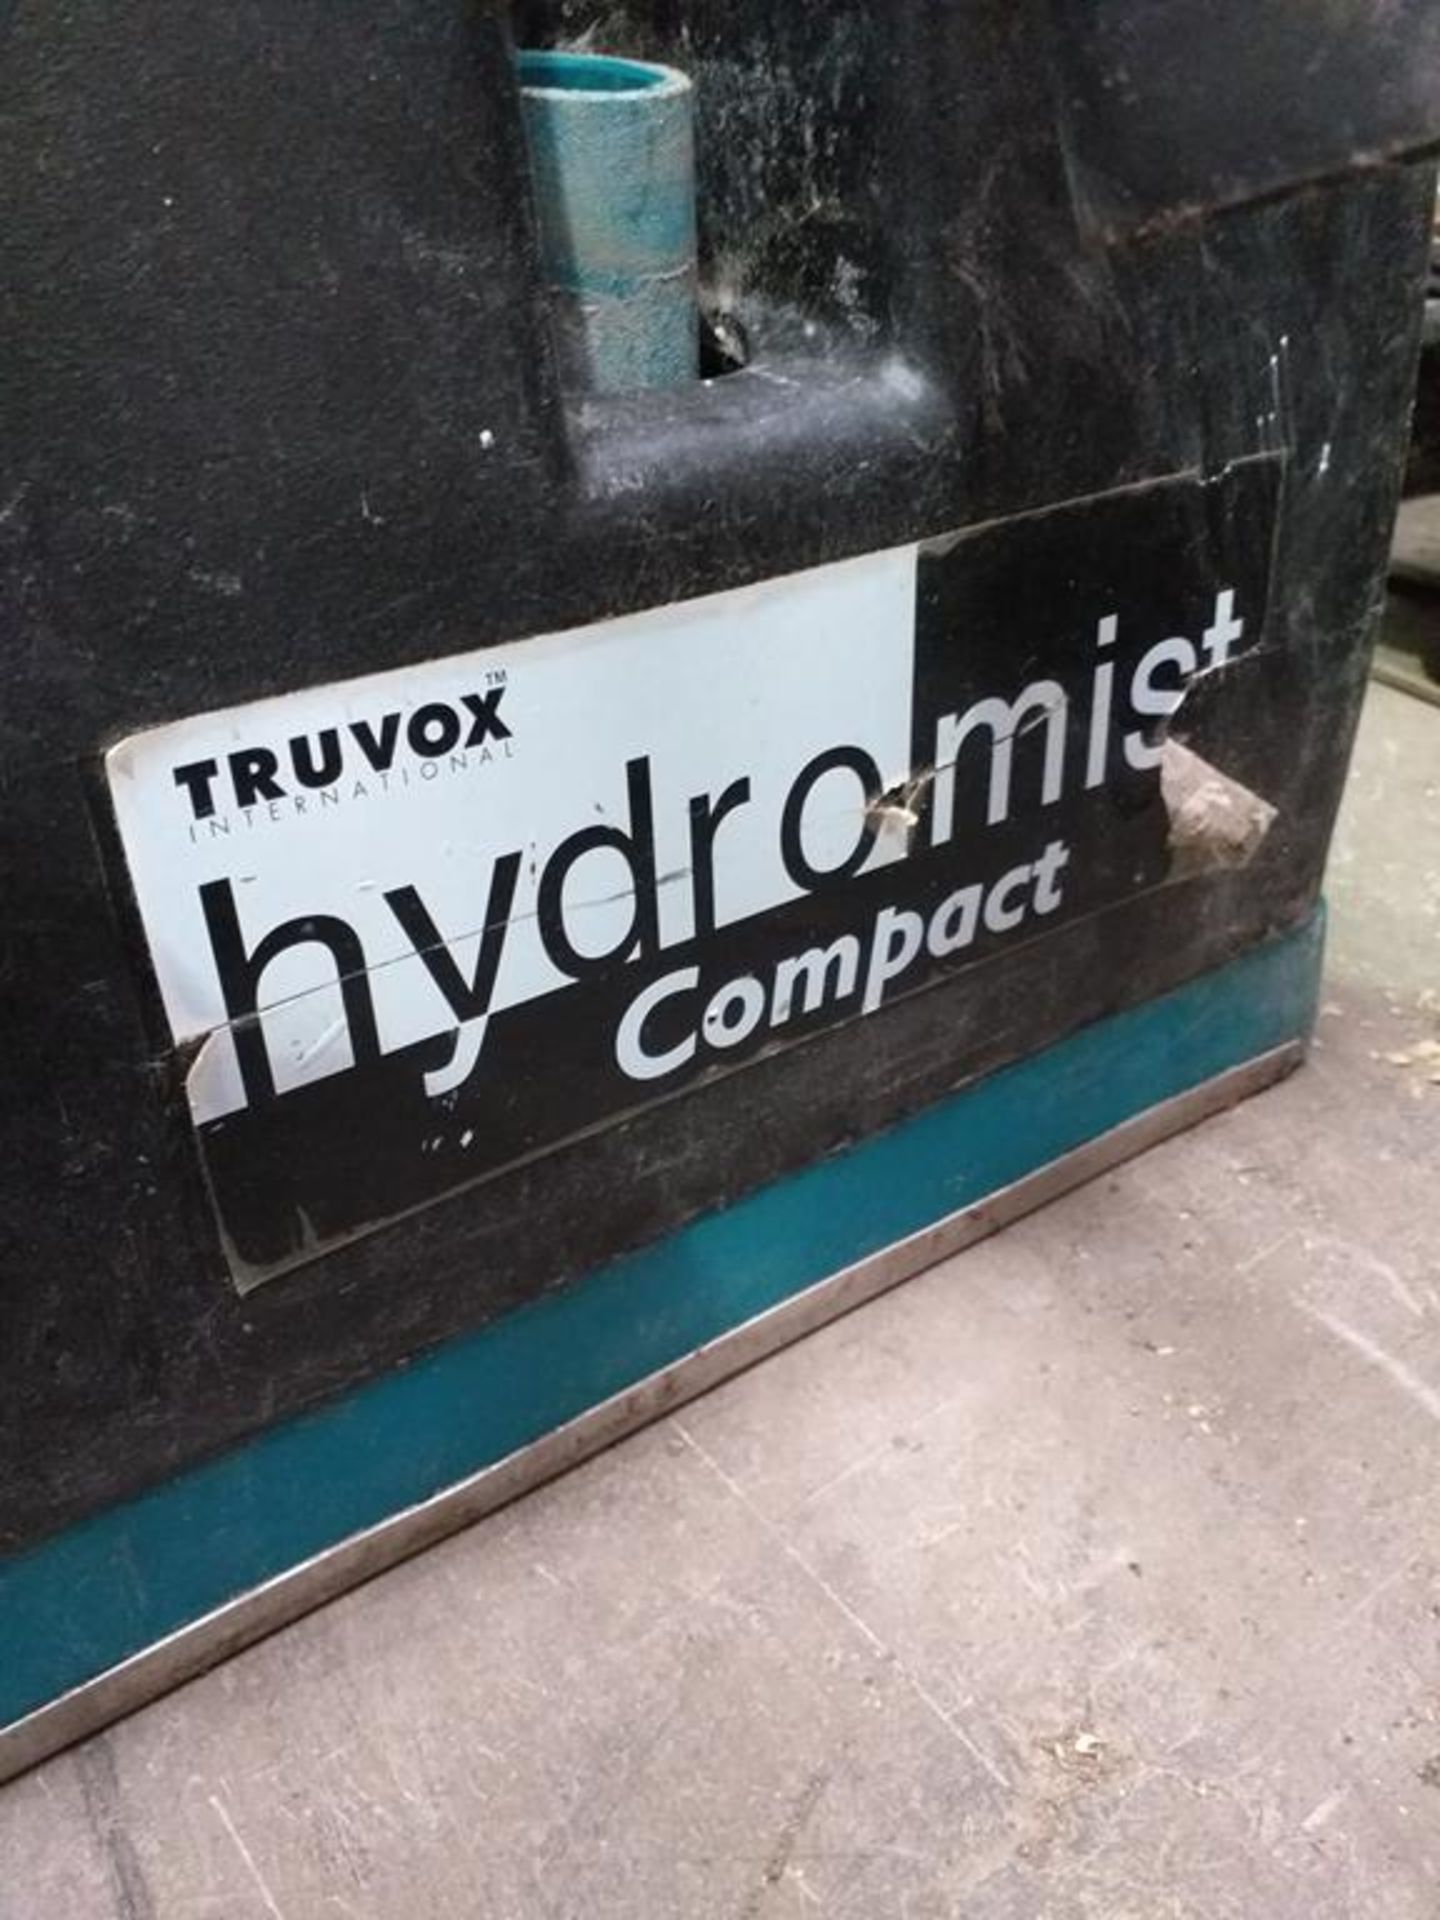 A Truvox Hydromist Compact Floor Cleaner - Image 2 of 3